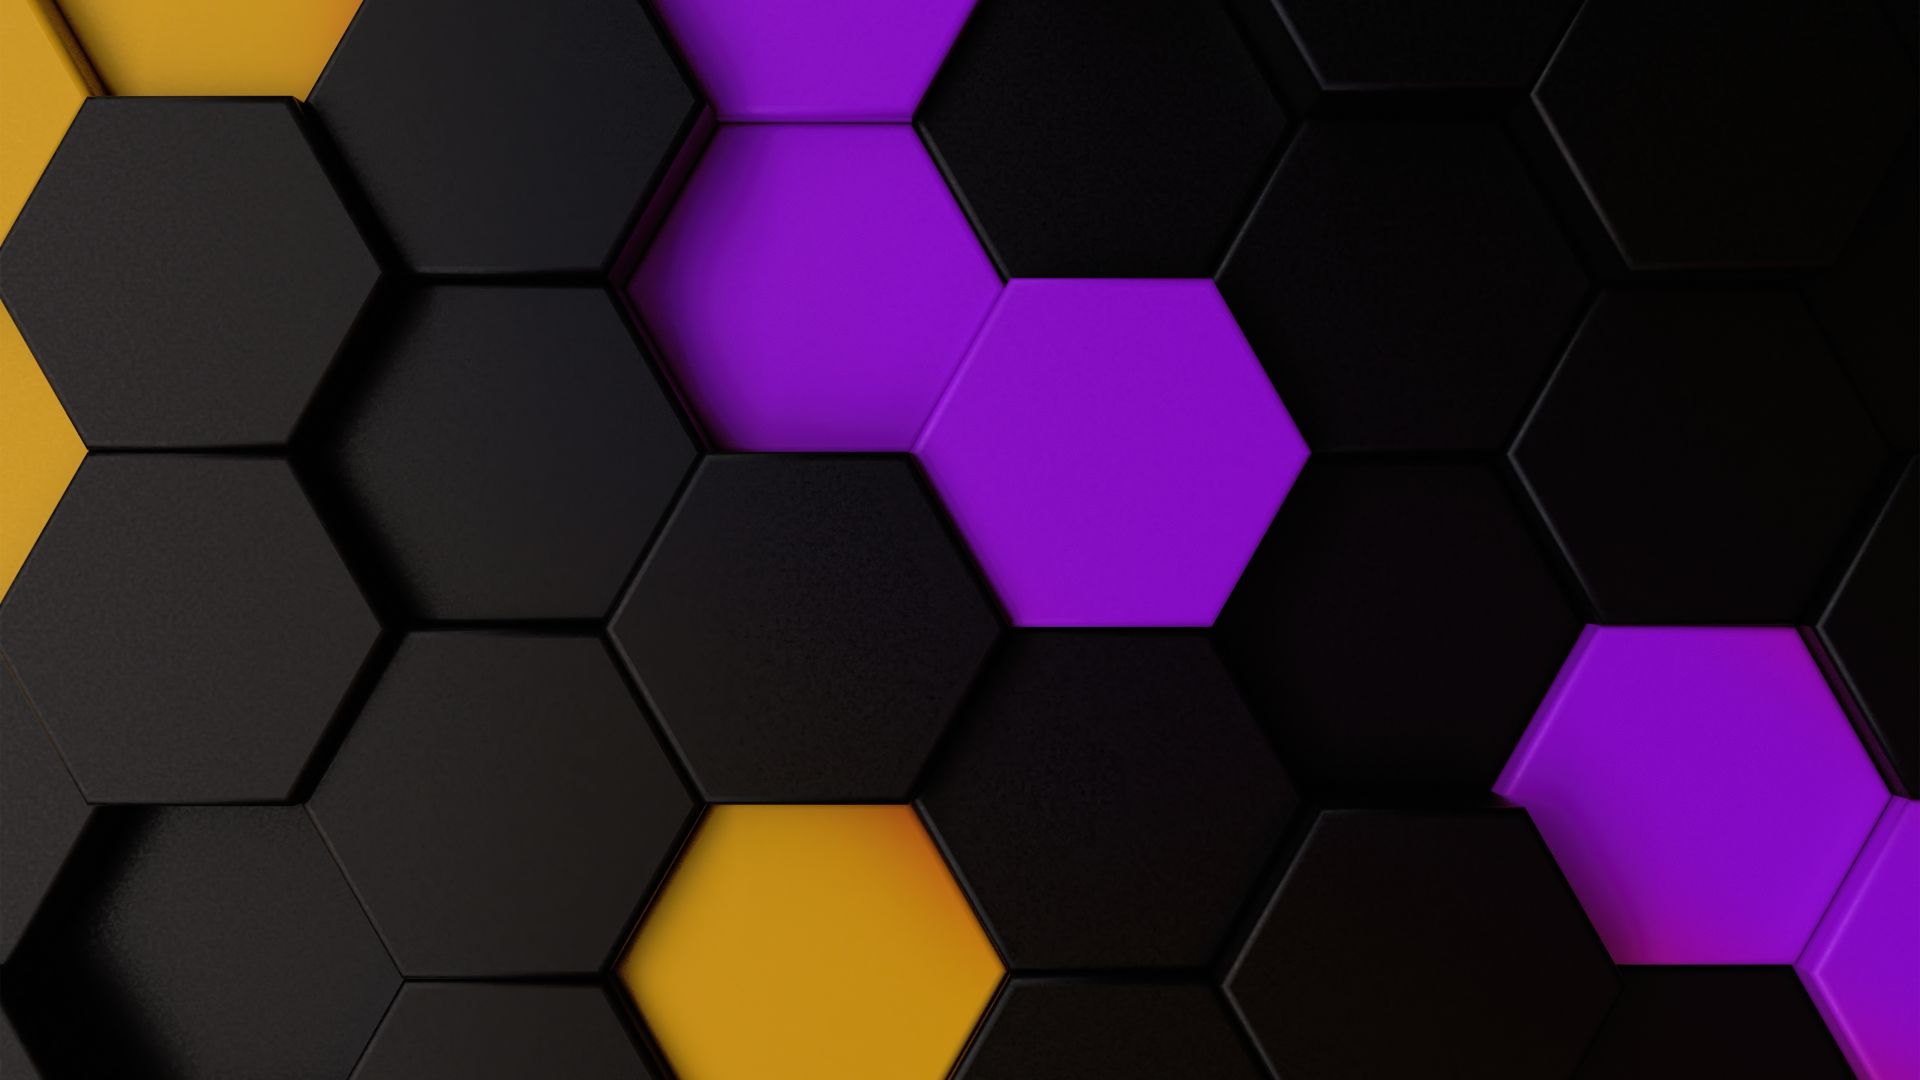 Desktop Wallpaper Purple Yellow Dark Polygons, Hexagons, Abstract, HD Image, Picture, Background, Ed81db